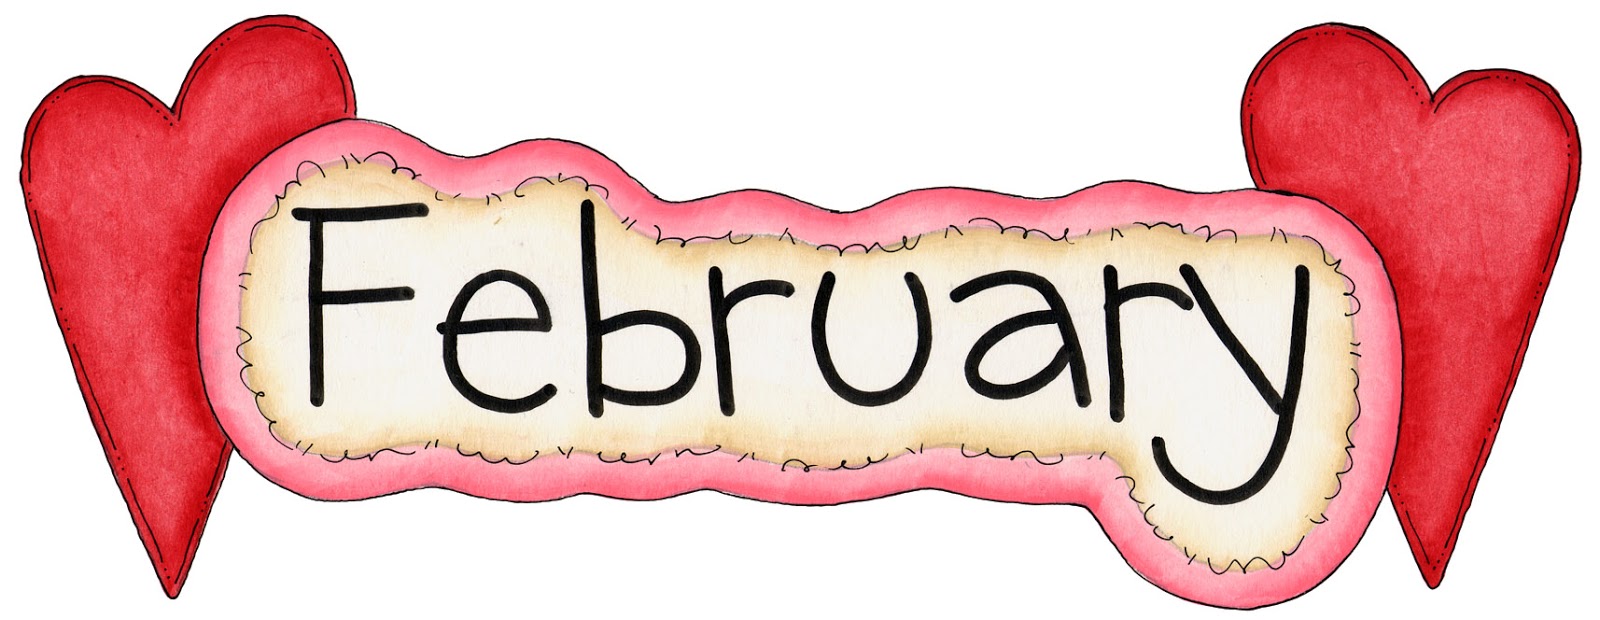 Free February Cliparts Download Free Clip Art Free Clip Art On Clipart Library Print out your favorite february 2021 calendar template or you can even download all of them and create your own monthly. clipart library